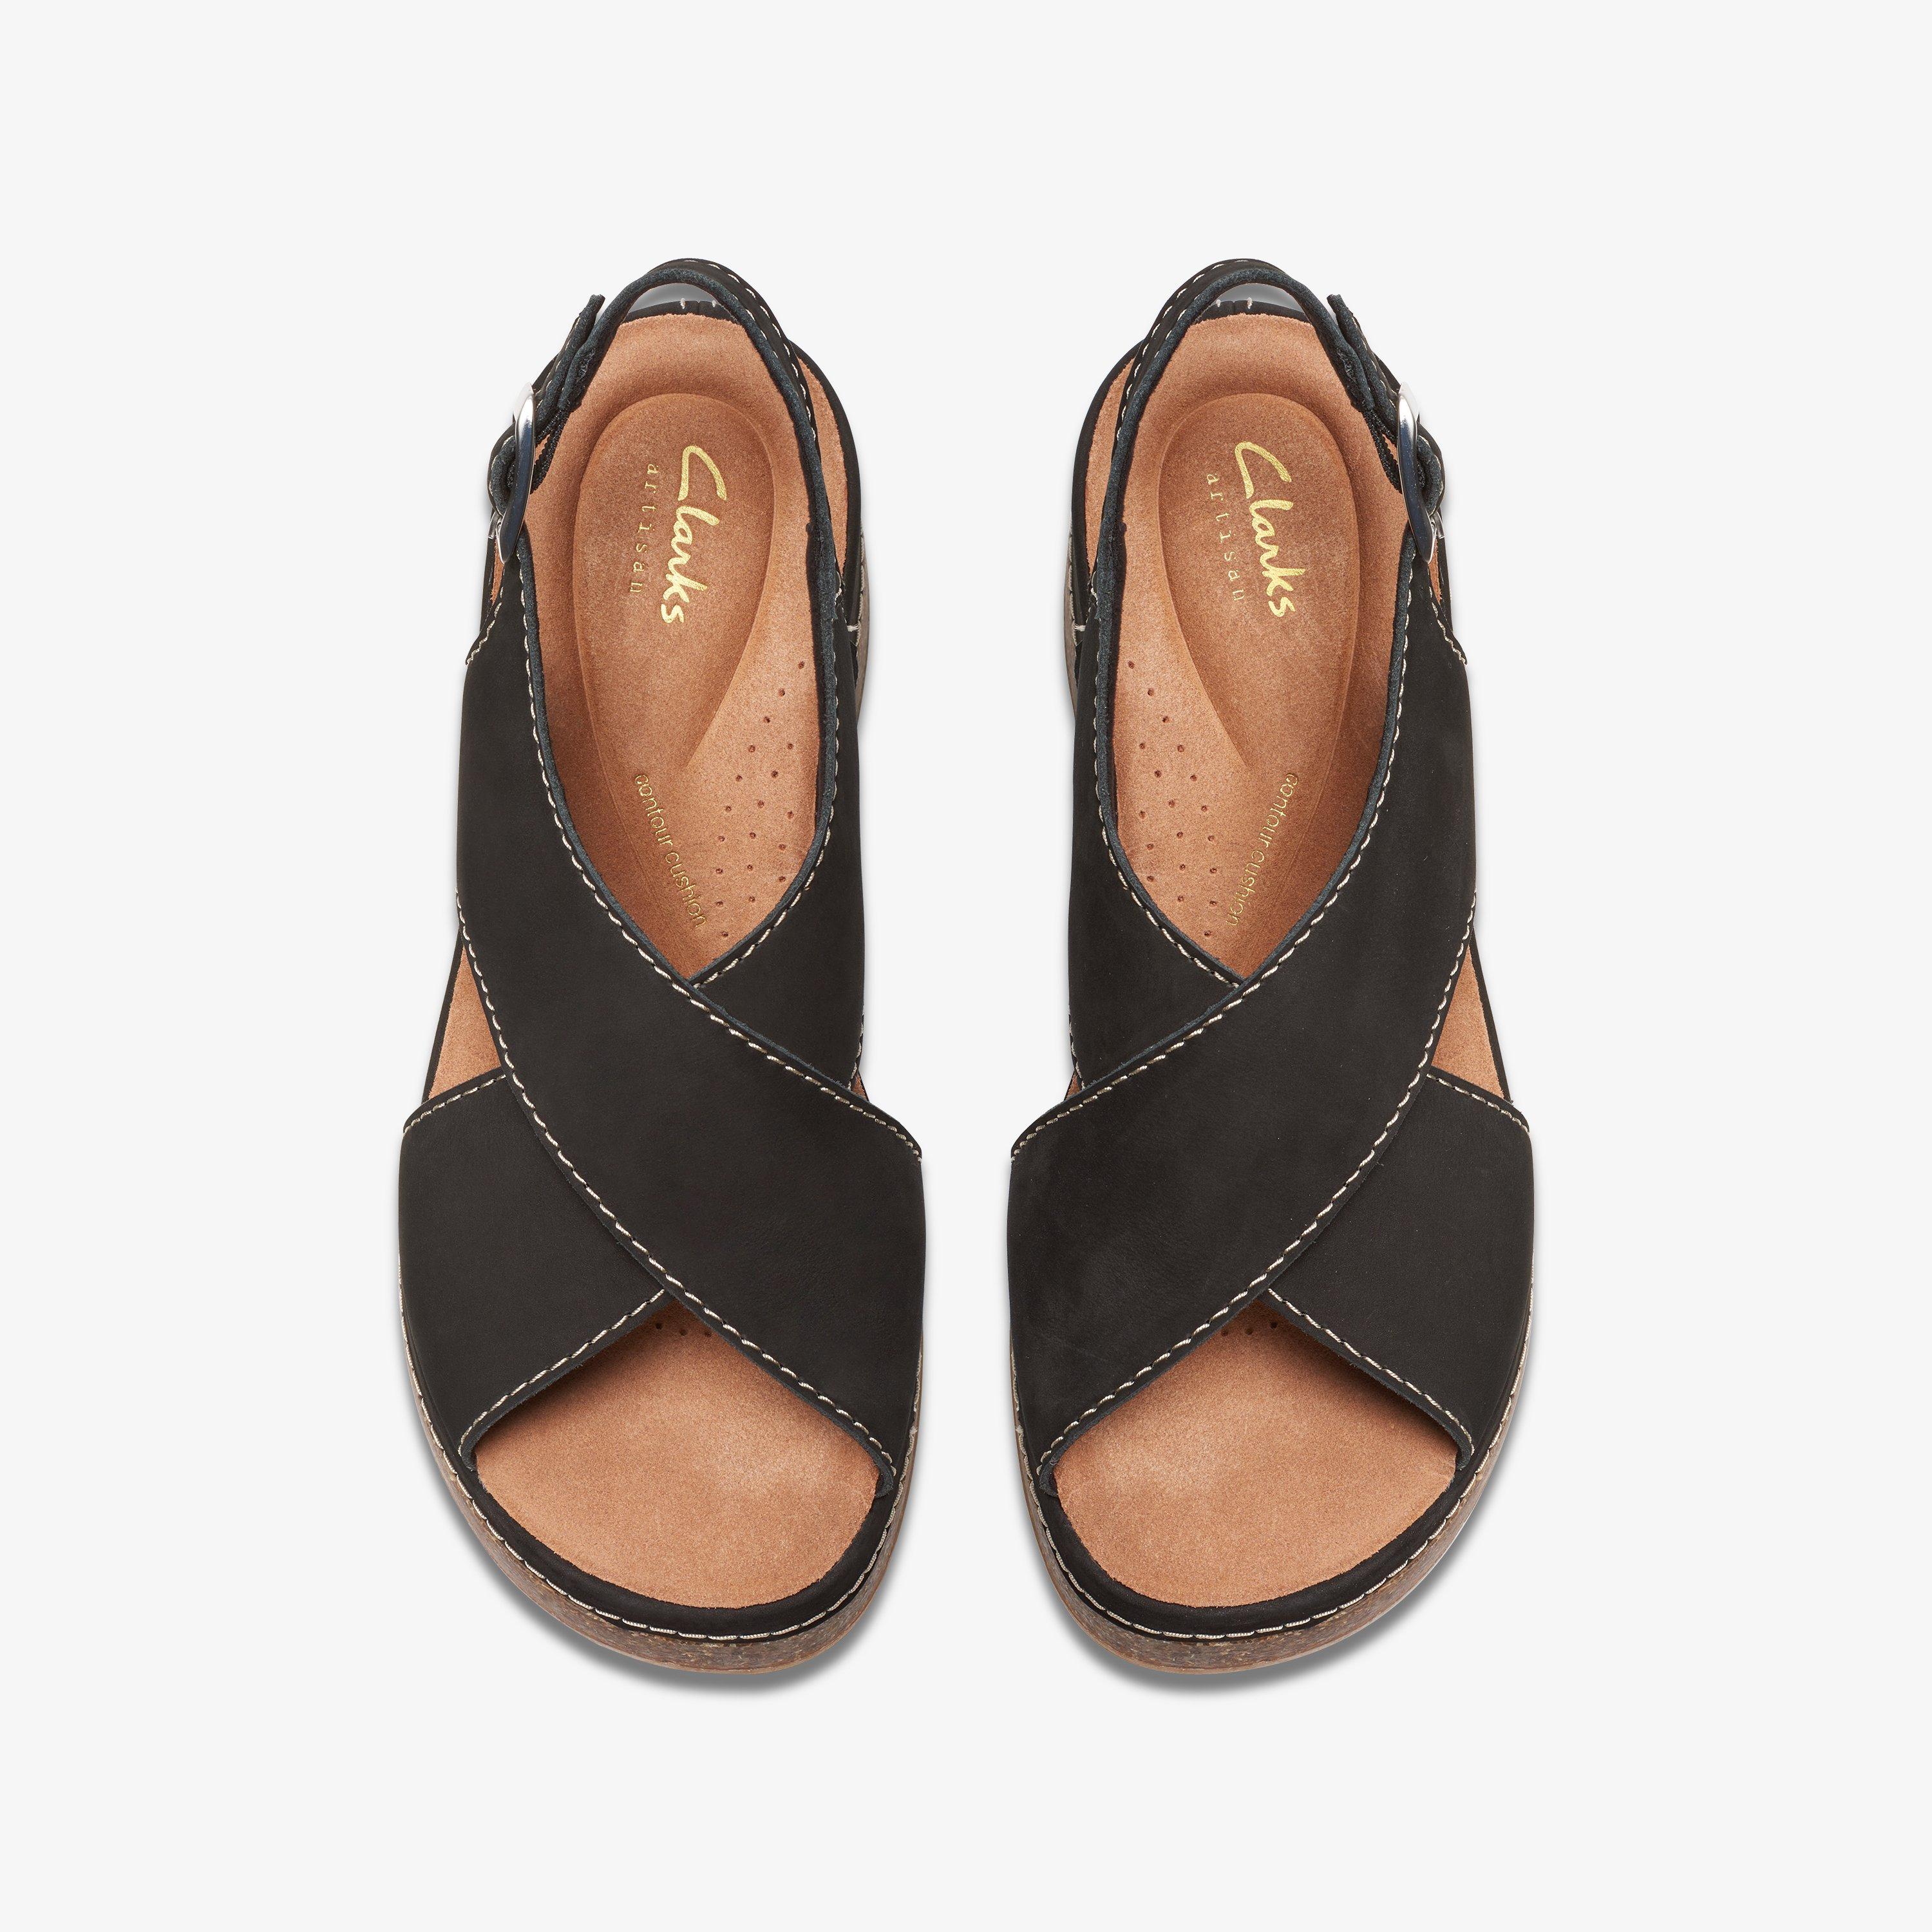 Women's Sandals - Flat, Heeled, Strappy & Leather